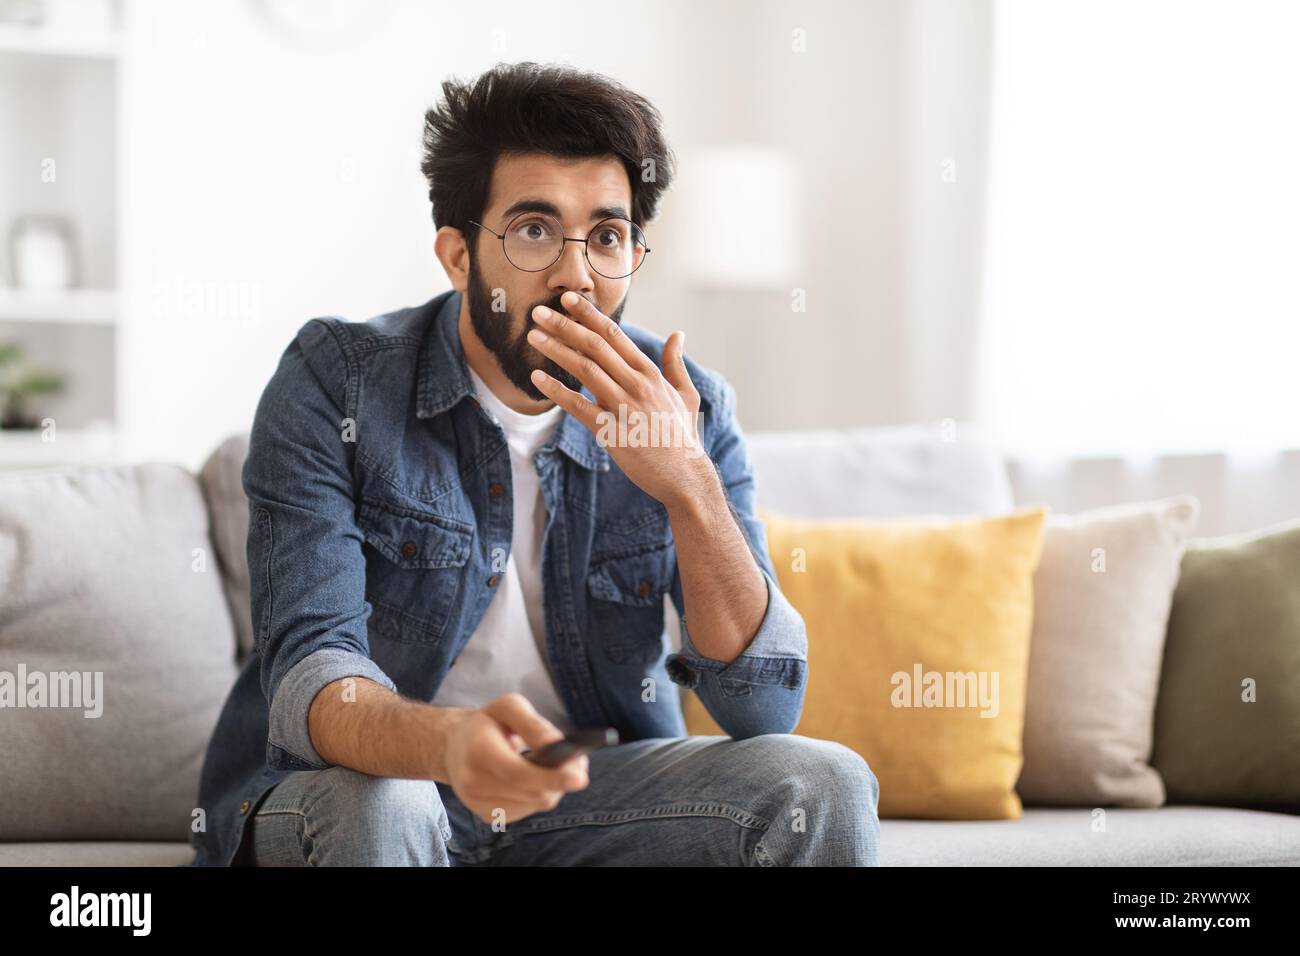 Portrait Of Amazed Indian Guy Holding Remote Controller And Looking At Tv Stock Photo